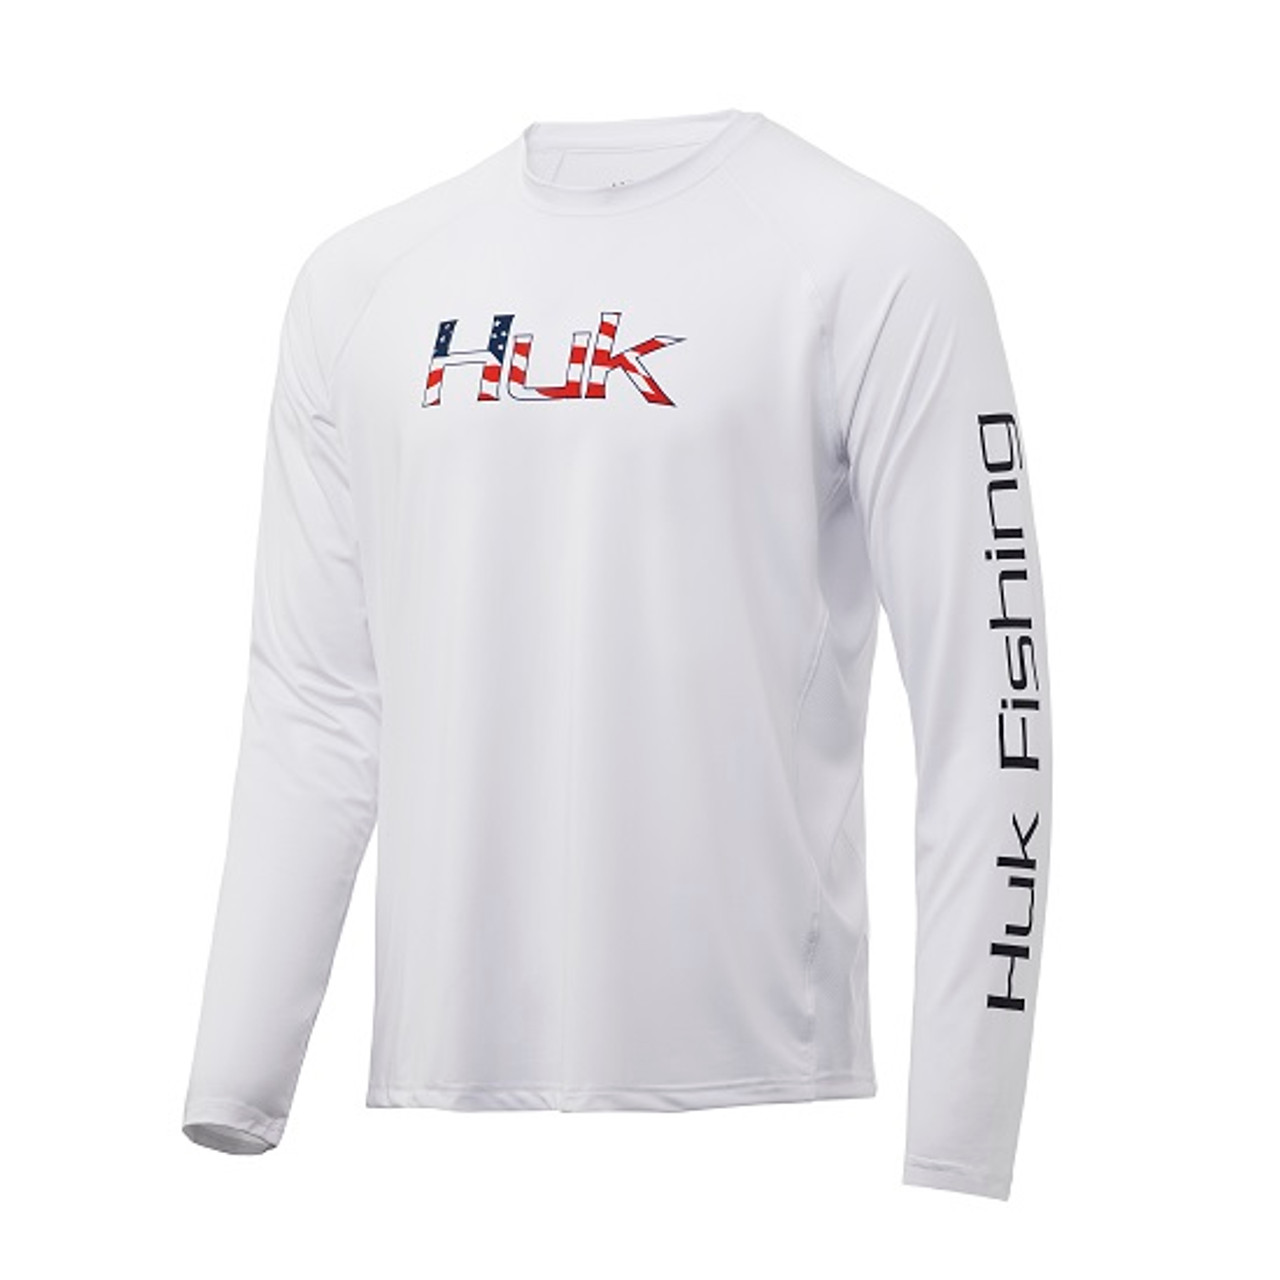 Huk American Fill Pursuit Shirt, White, MD - H1200237-100-M